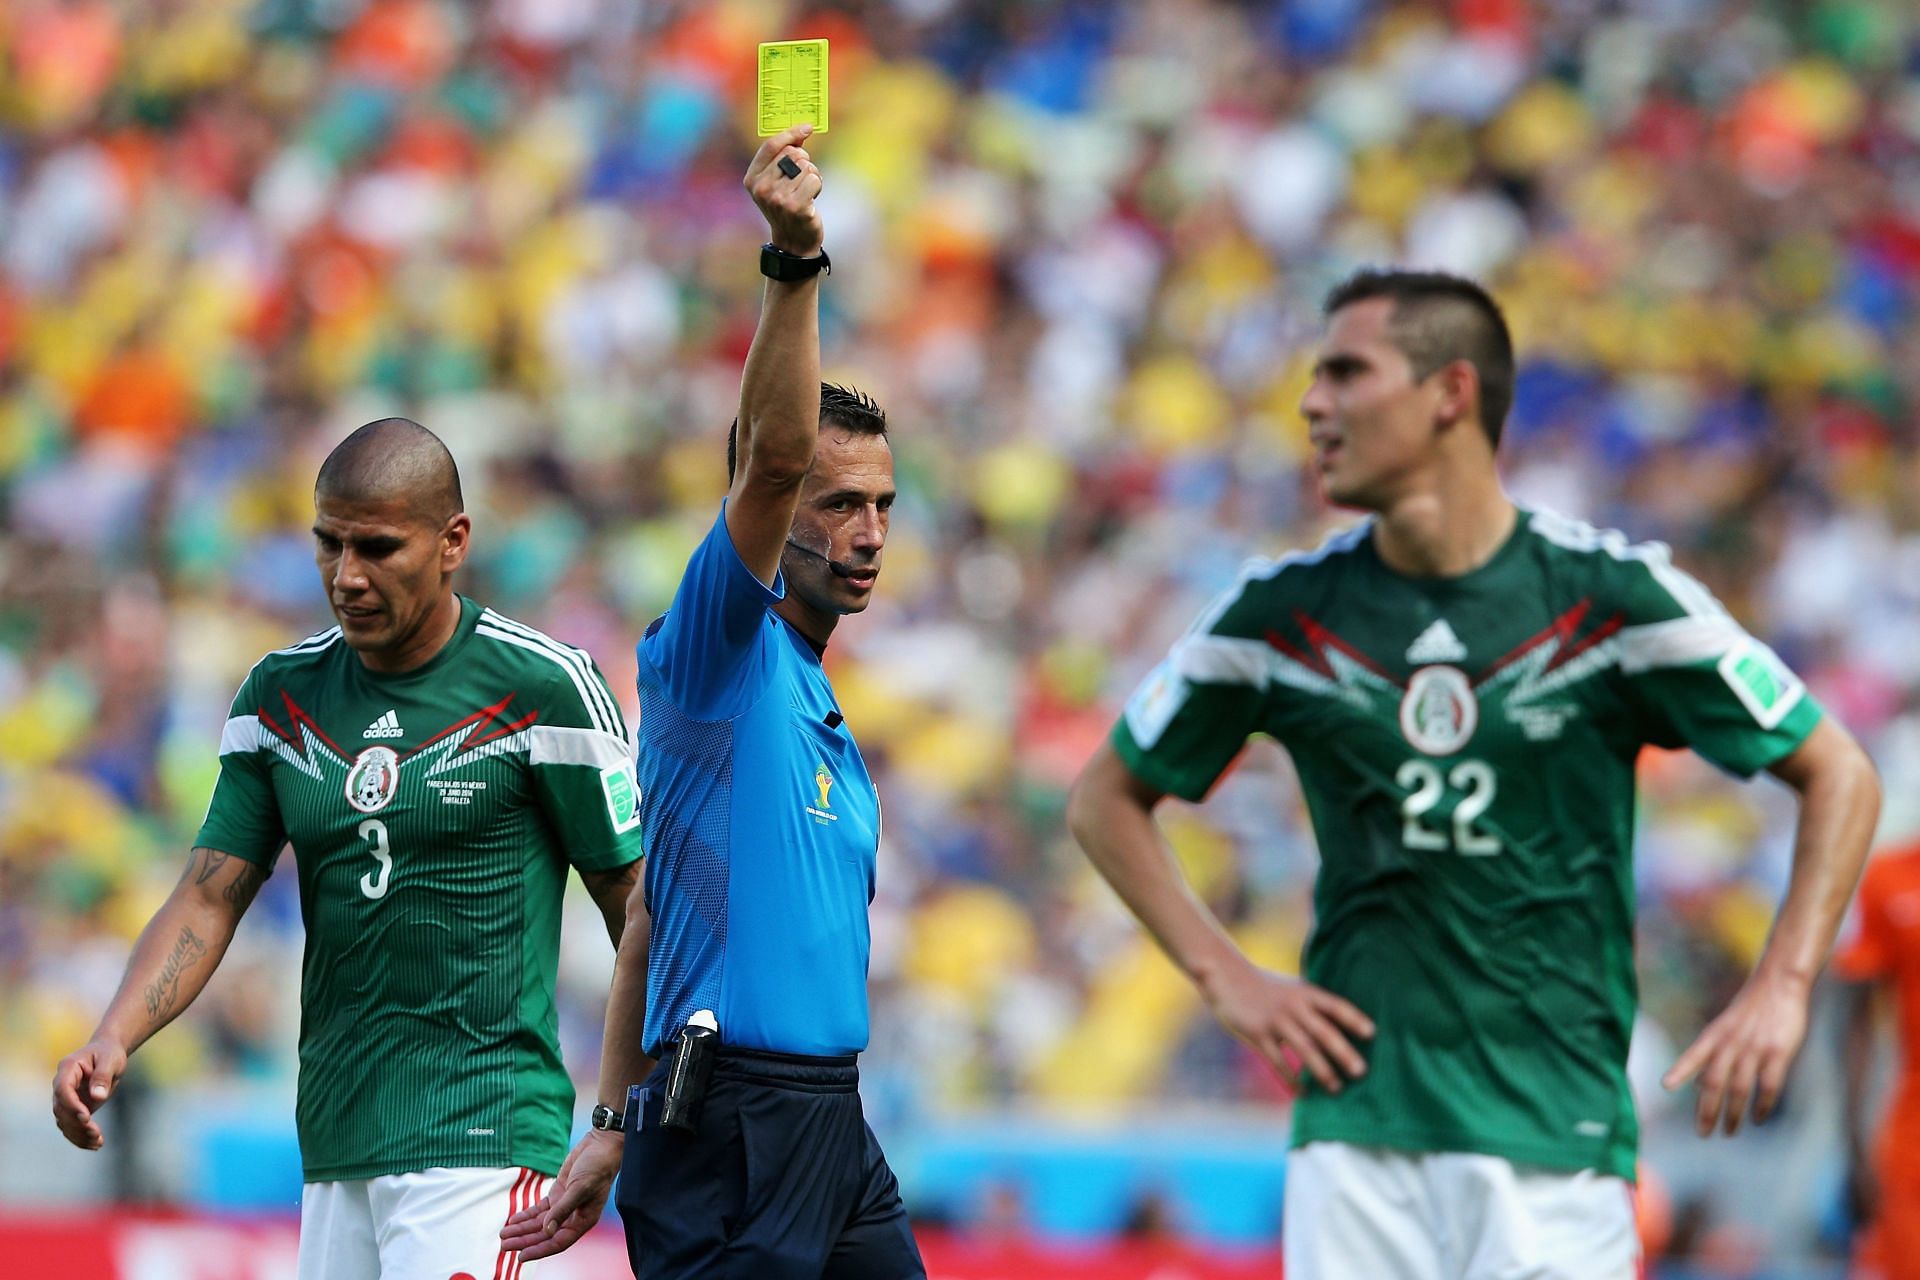 Referee Pedro Proenca shows a yellow card to Paul Aguilar of Mexico during the 2014 FIFA World Cup Brazil Round of 16 matches between Netherlands and Mexico.